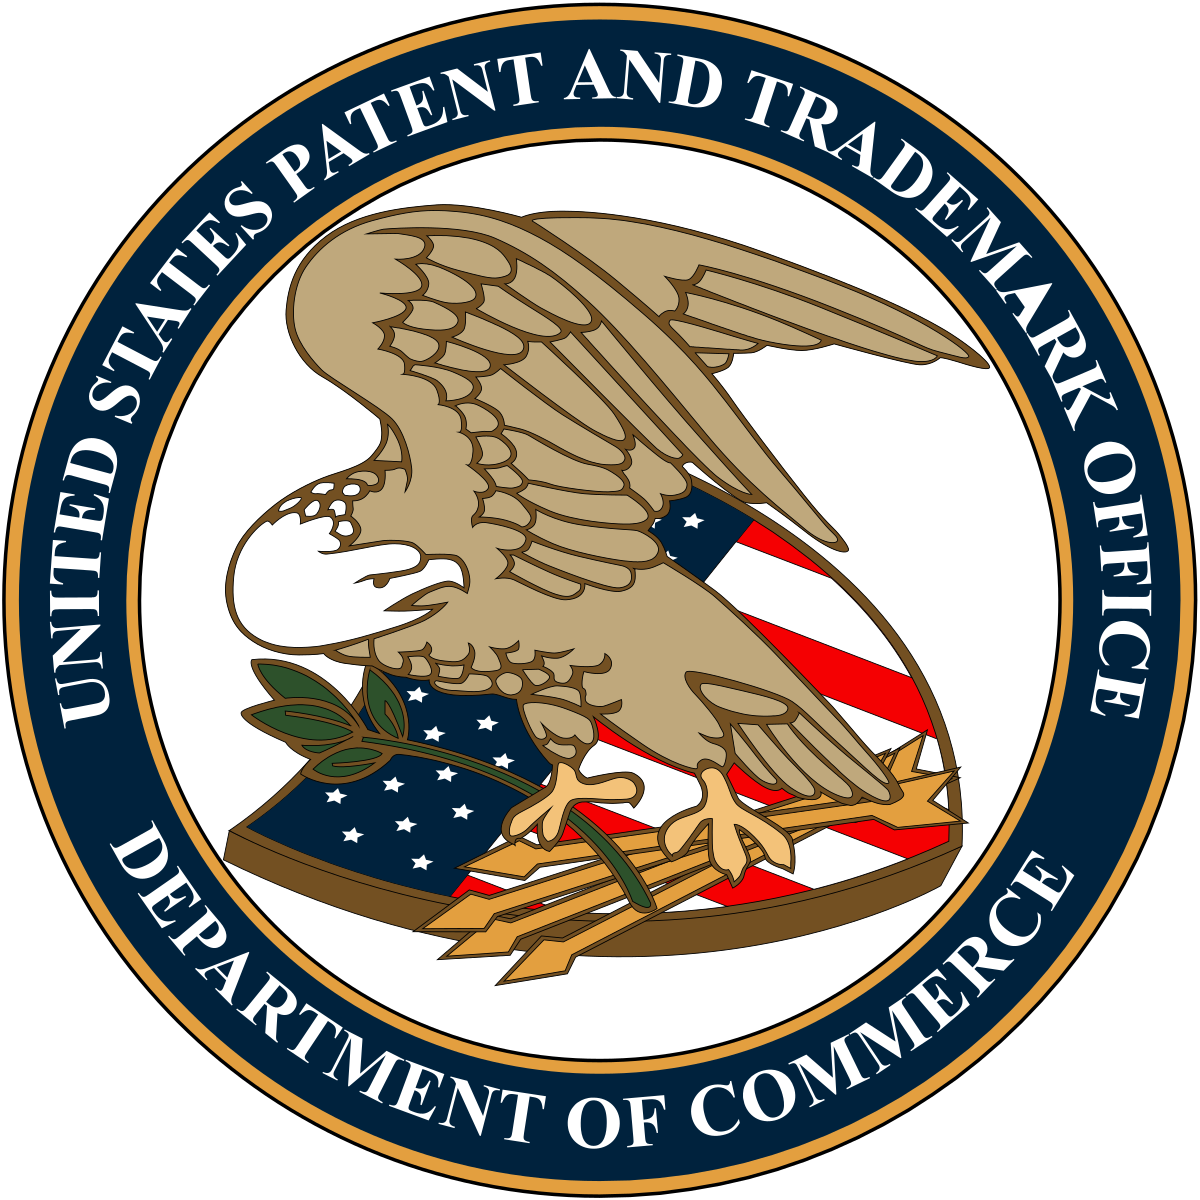 1200px-Seal_of_the_United_States_Patent_and_Trademark_Office.svg.png